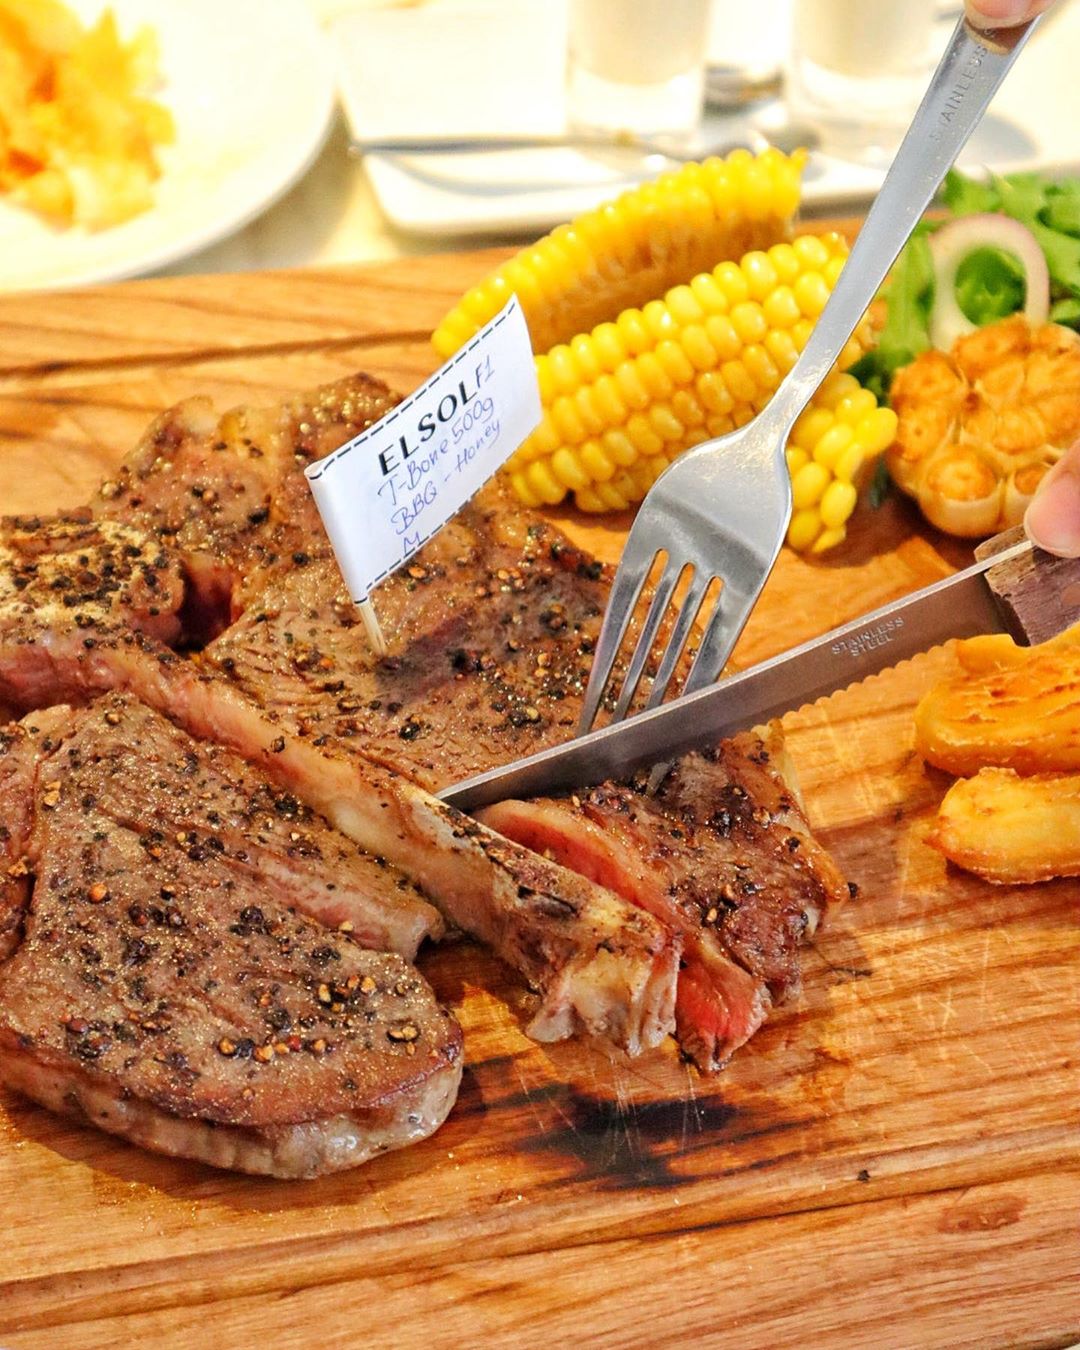 T-bone500g-US-ELSOL-Meat-and-wine